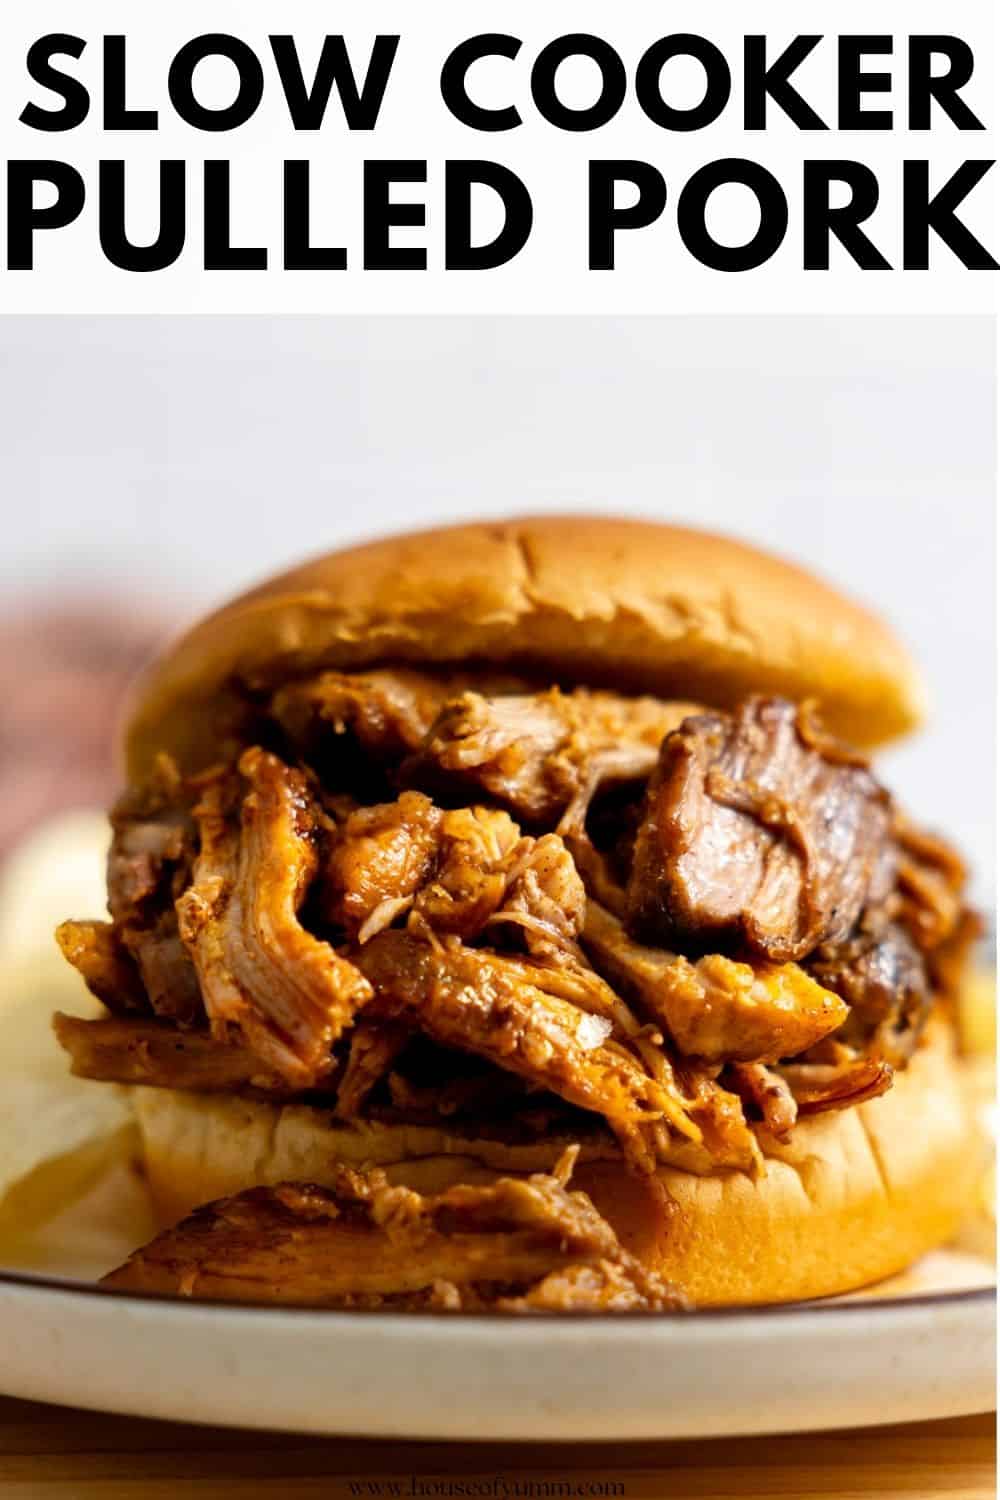 Slow cooker pulled pork with text.